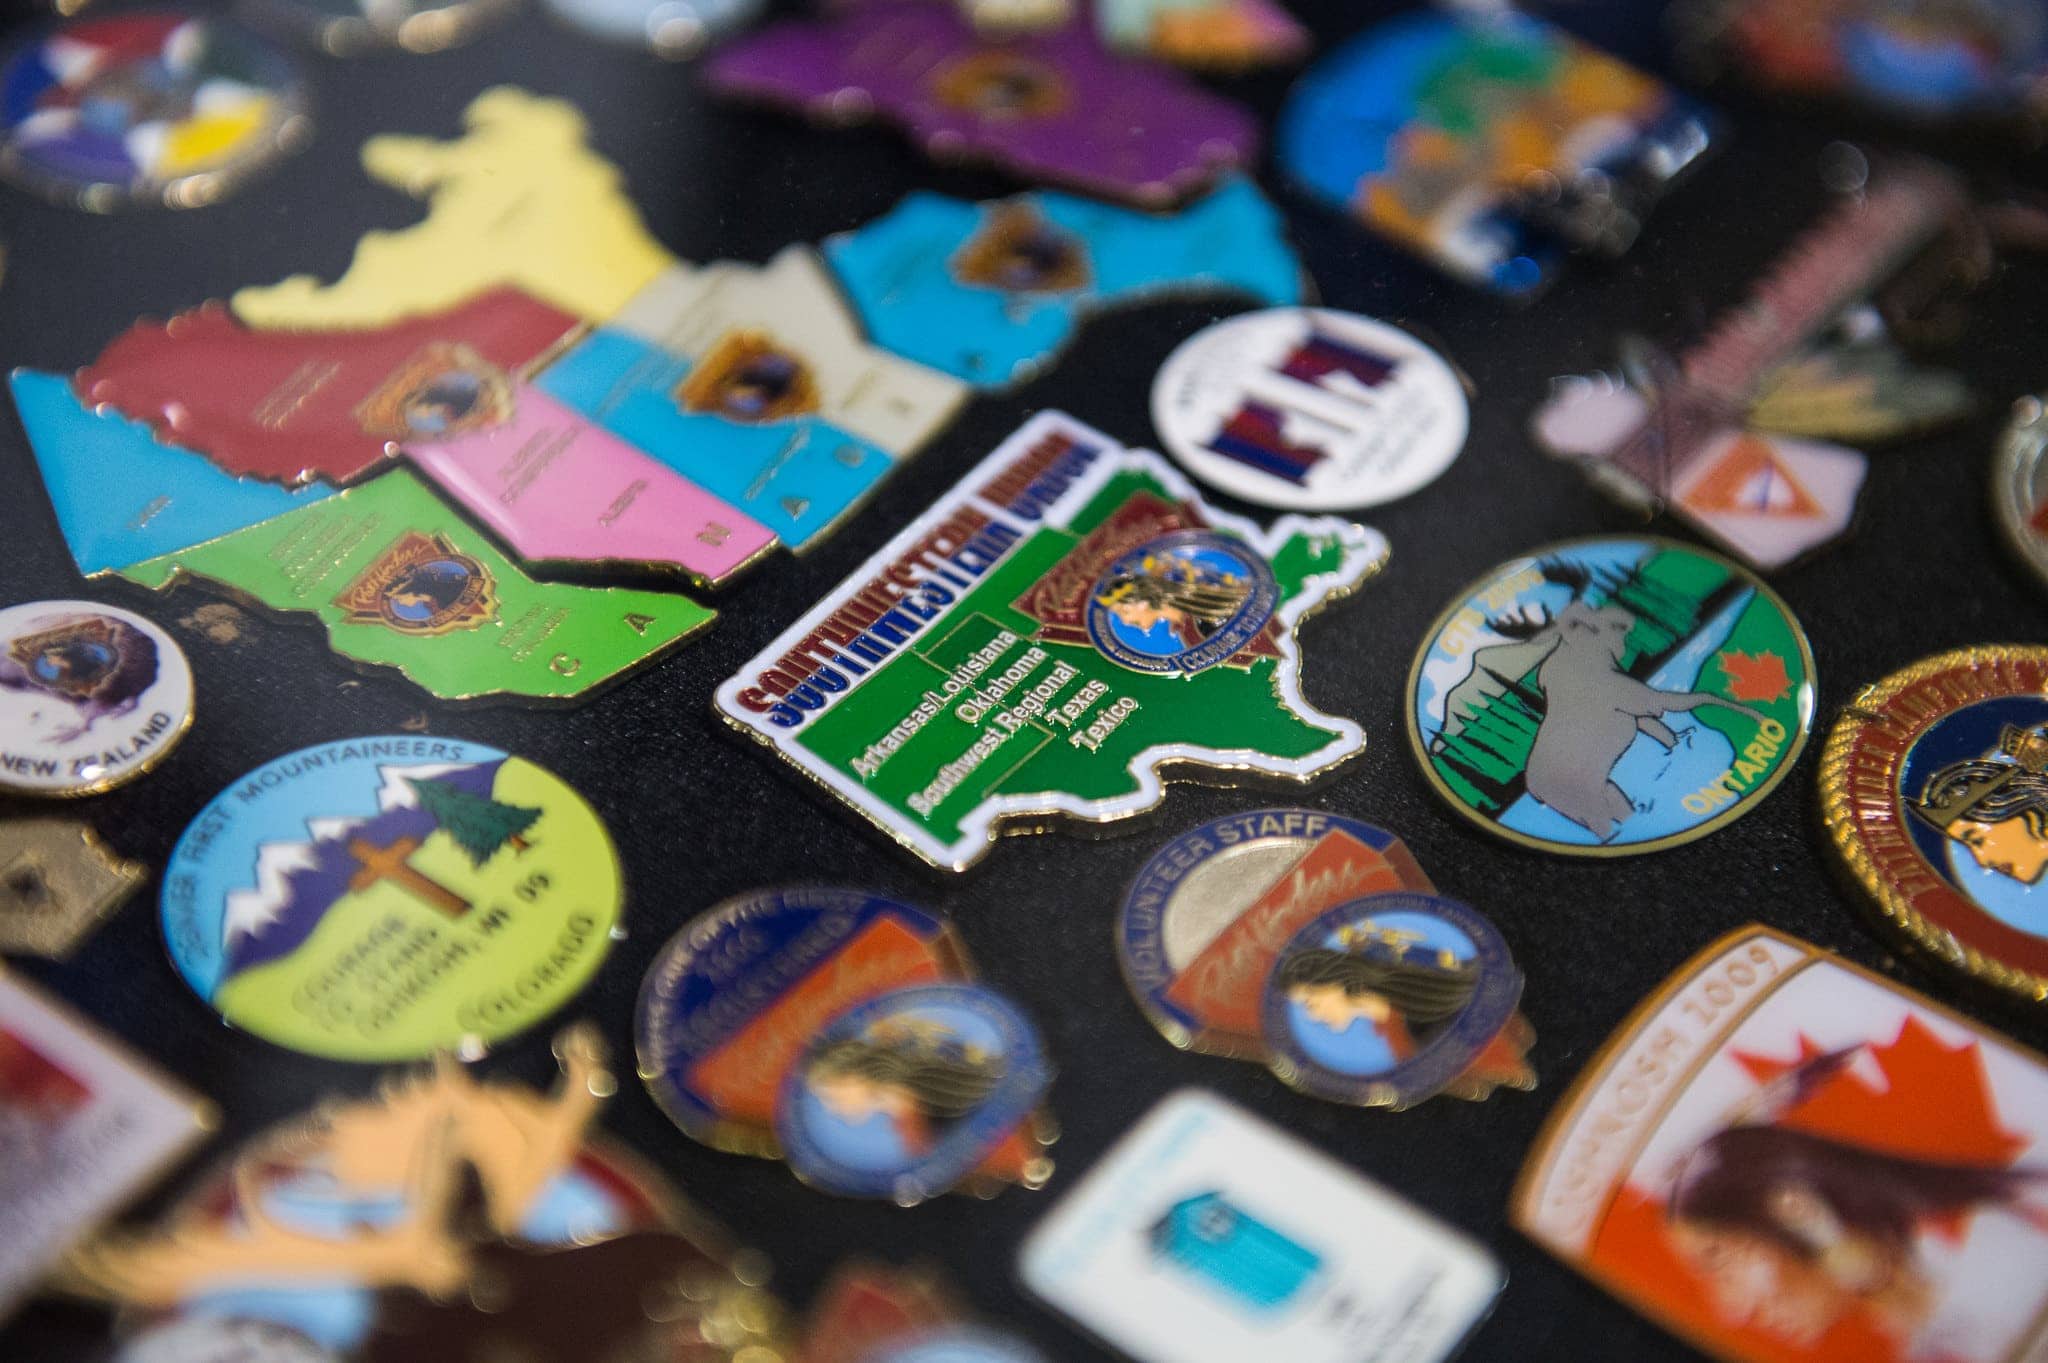 A Southwestern Union Conference Pathfinder pin stands out in the middle of a pin display board at the Pathfinder Heritage Museum at the 2014 “Forever Faithful” International Pathfinder Camporee in Oshkosh. [Photo: James Bokovoy Photography]